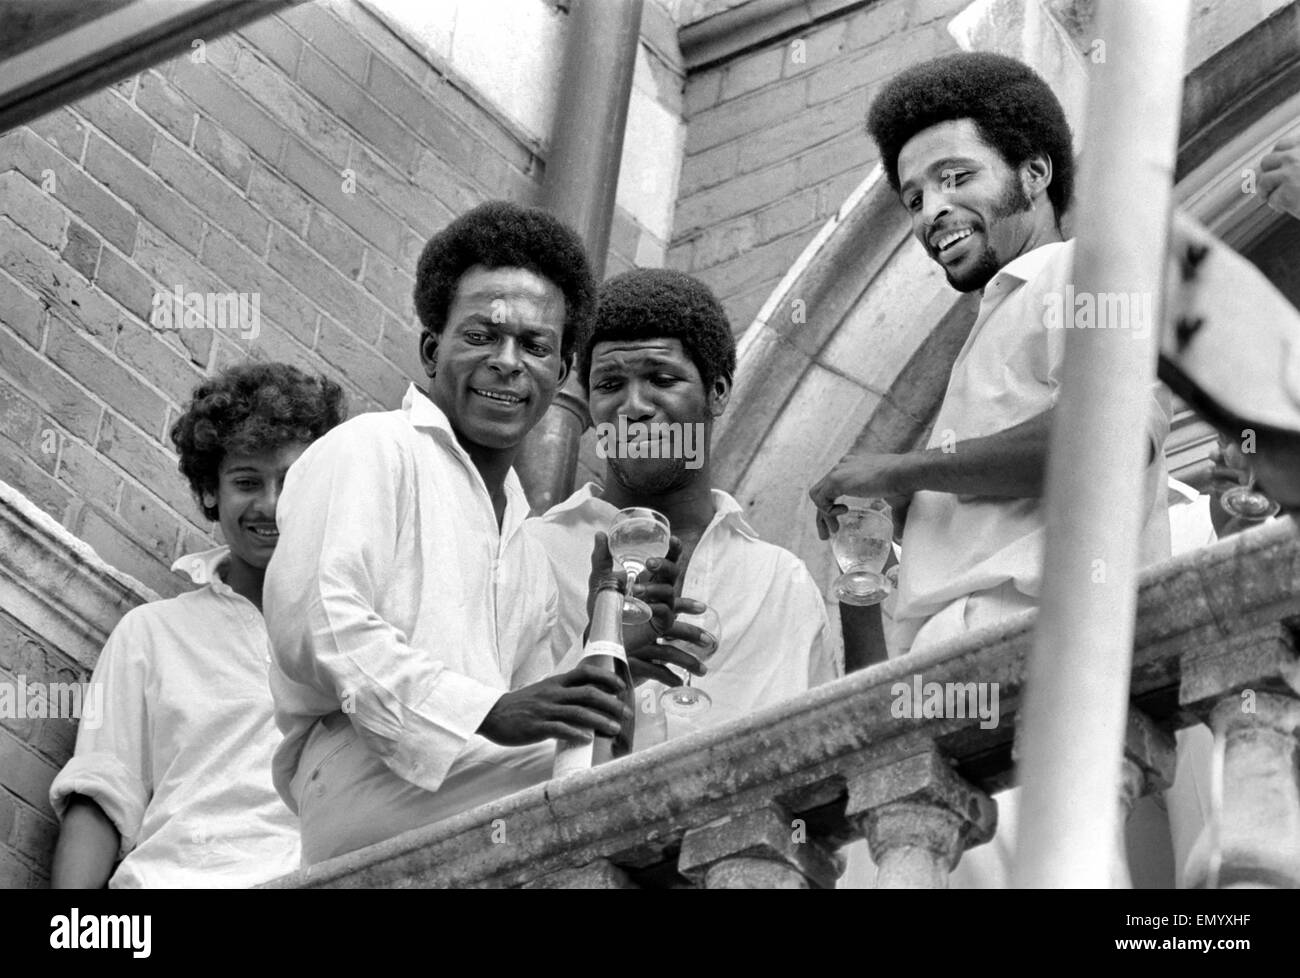 England v West Indies at The Oval. West Indies won by 158 runs. West Indian players celebrate after the win. 31st July 1973. Stock Photo